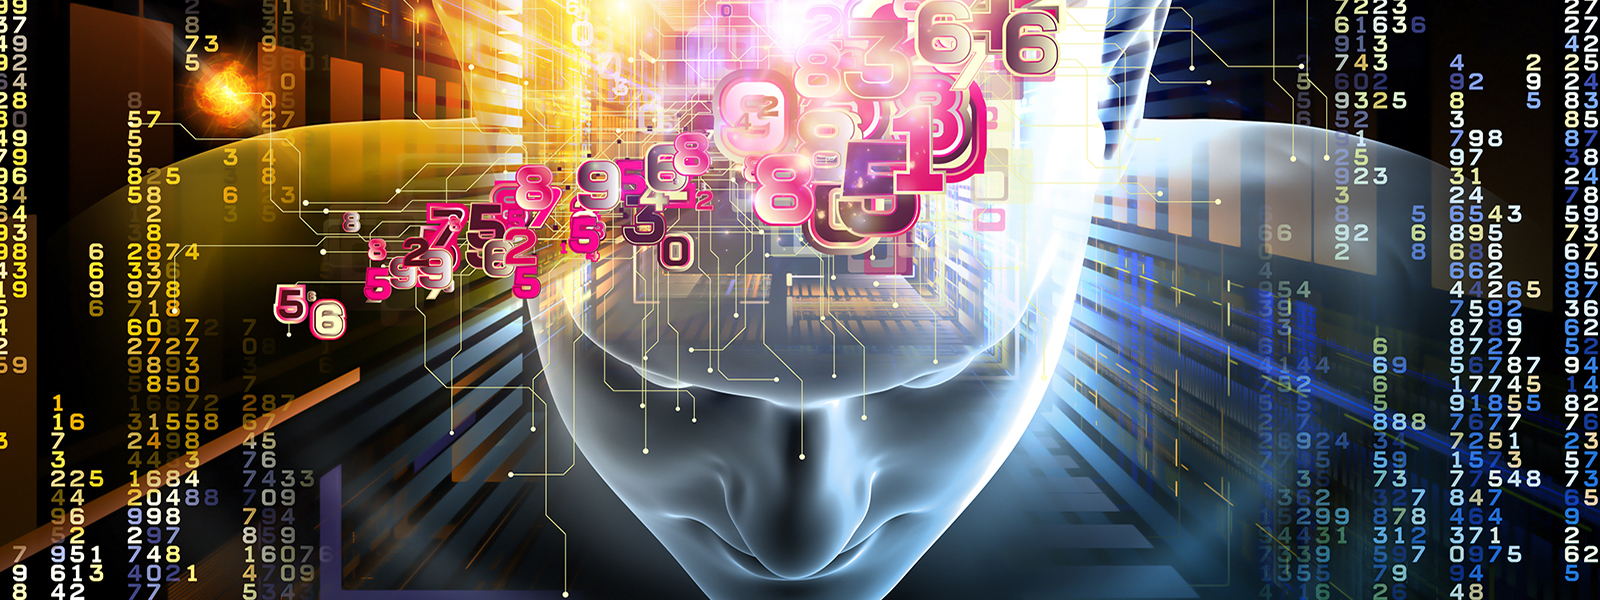 Collage of human head, digits and various abstract elements on the subject of artificial intelligence